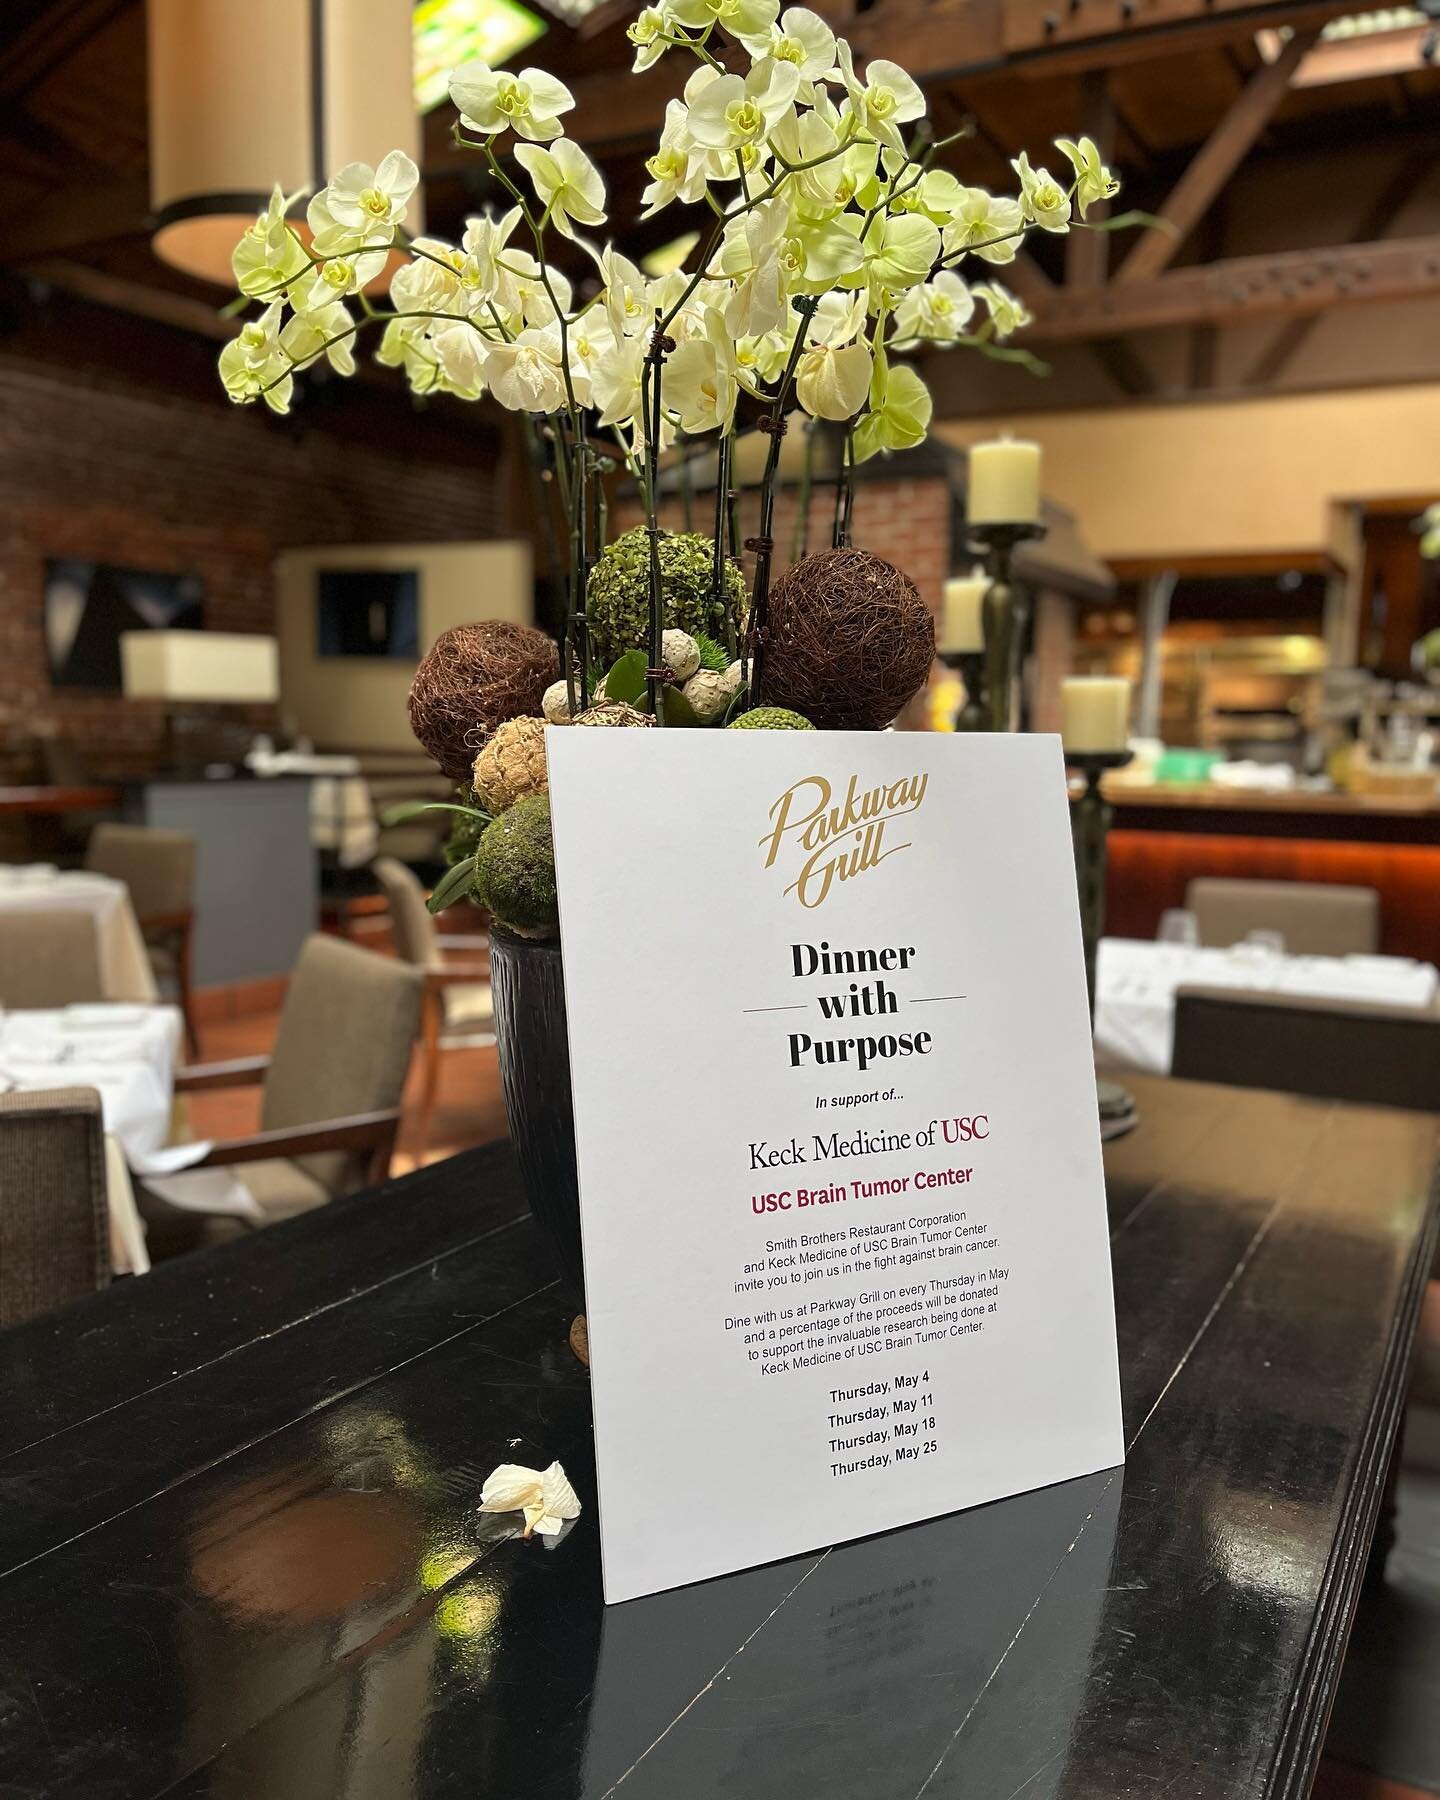 Dine with us at Parkway Grill on every Thursday in May and a percentage of the proceeds will be donated to support the invaluable research being done at Keck Medicine of USC Brain Tumor Center.

Smith Brothers Restaurant Corporation and Keck Medicine